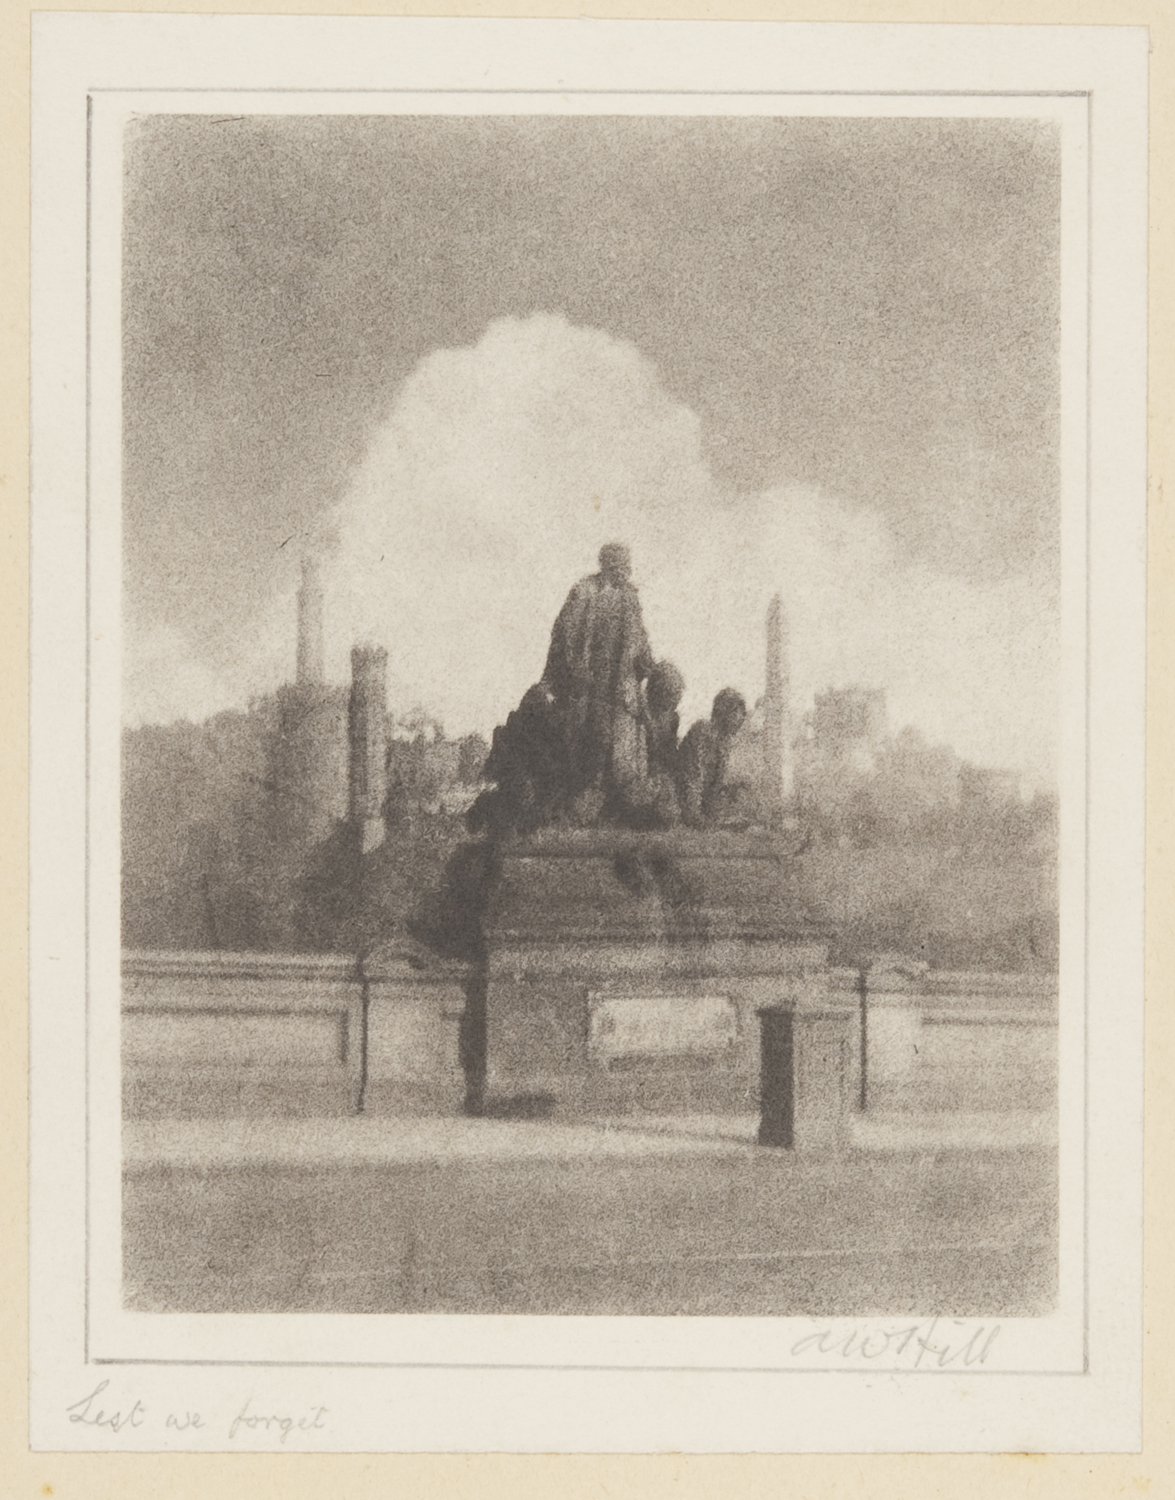 "Lest we forget", bromoil transfer print, date unknown ca.1920s-30s, by Alexander Wilson Hill (1867-1949)